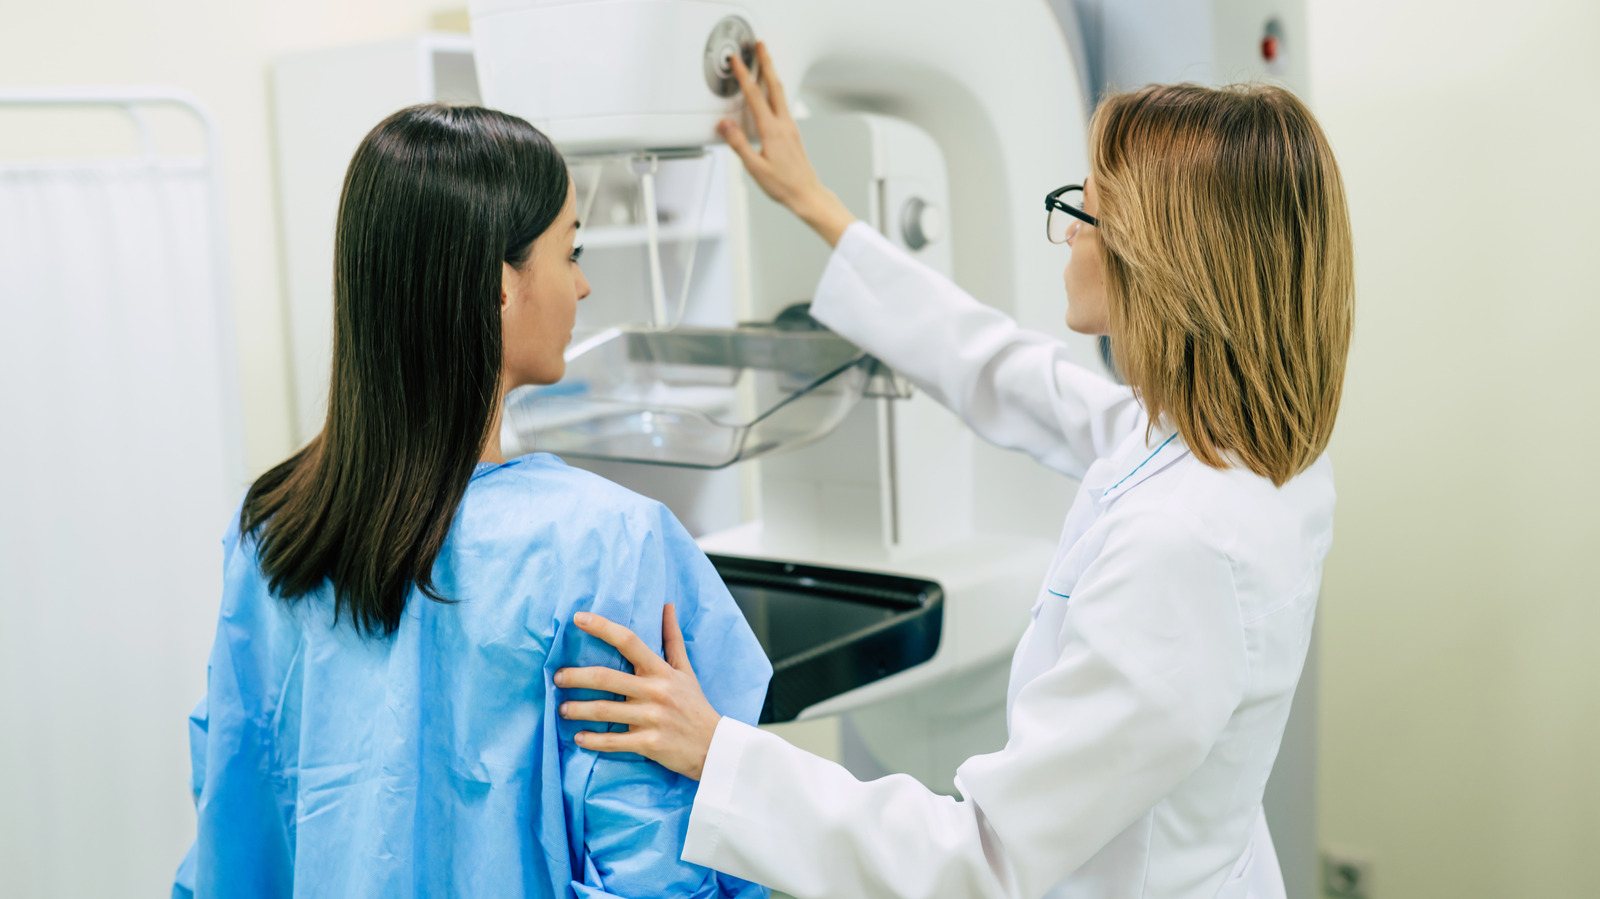 What To Expect During Treatment For Breast Cancer, According To An Oncologist – Health Digest